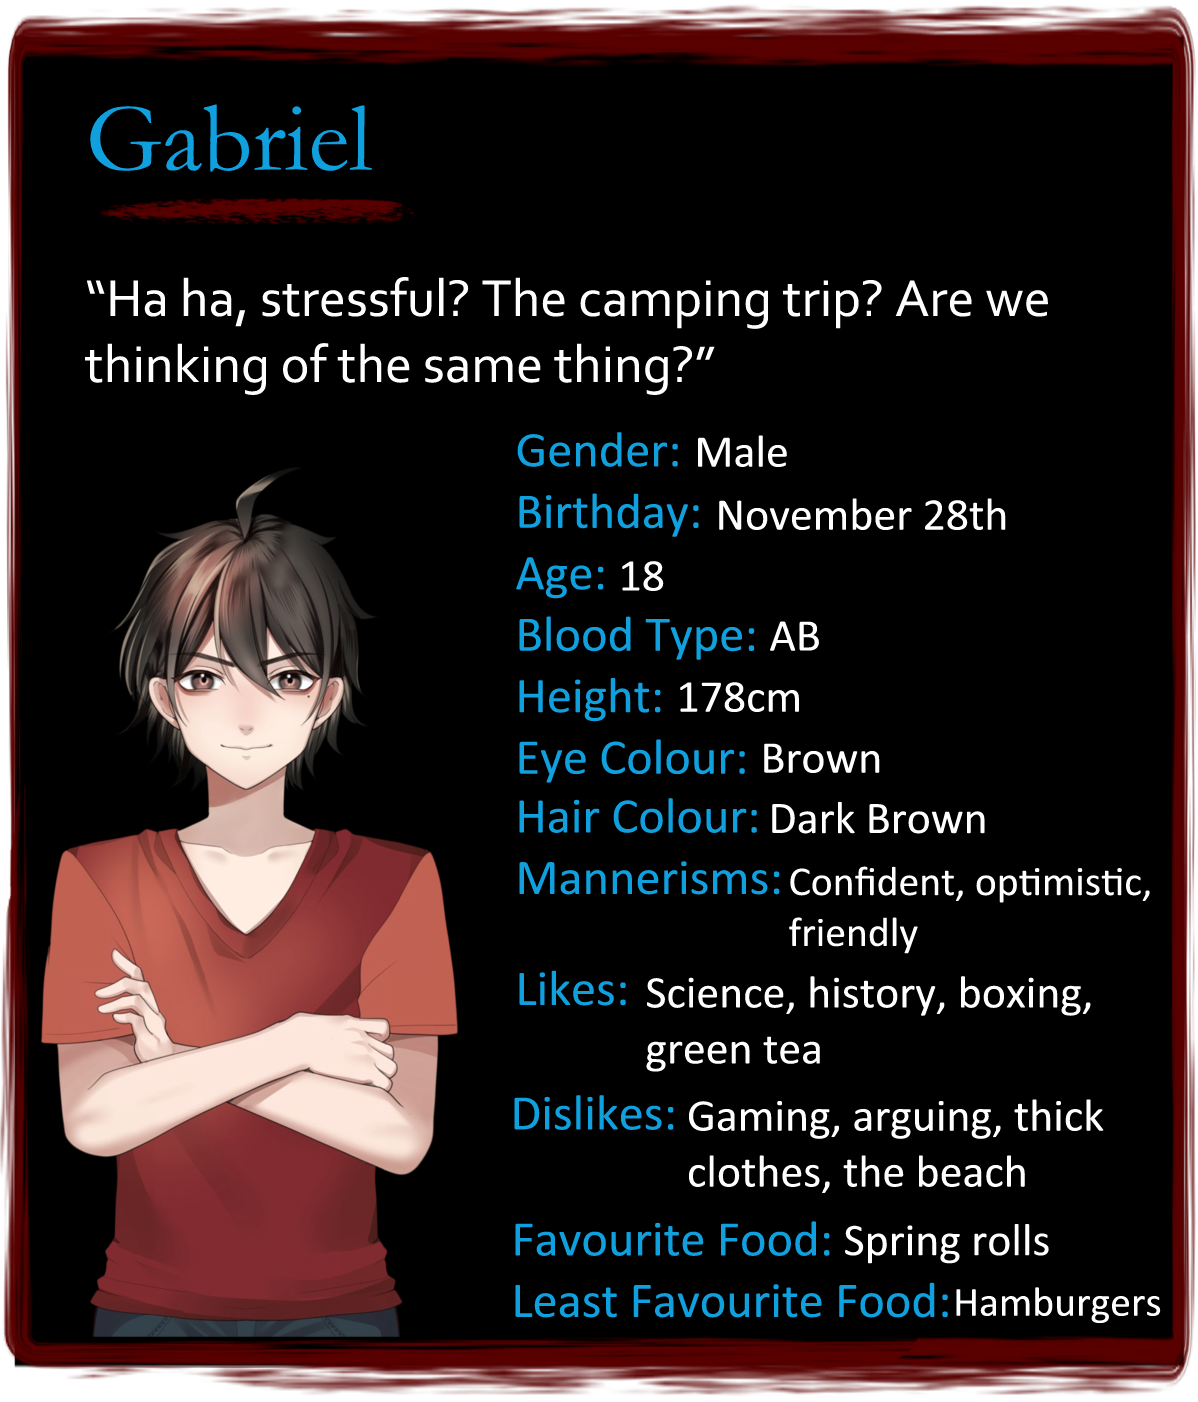 A profile card containing information about Gabriel, one of the characters in The Many Deaths of Lily Kosen